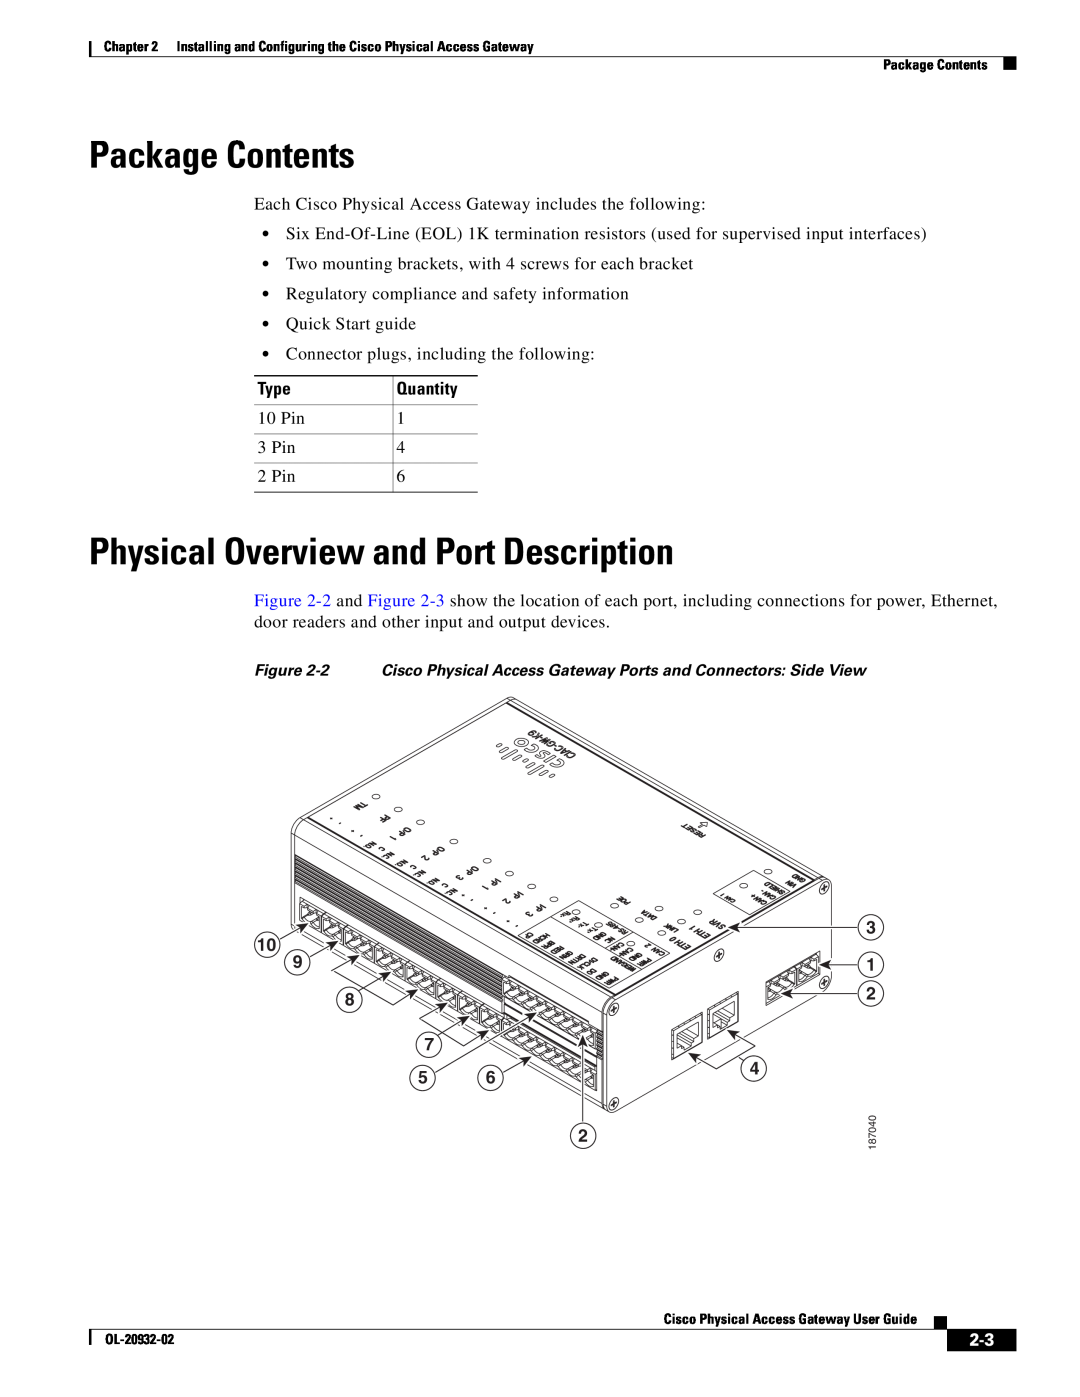 Cisco Systems OL-20932-02 manual Package Contents, Physical Overview and Port Description 